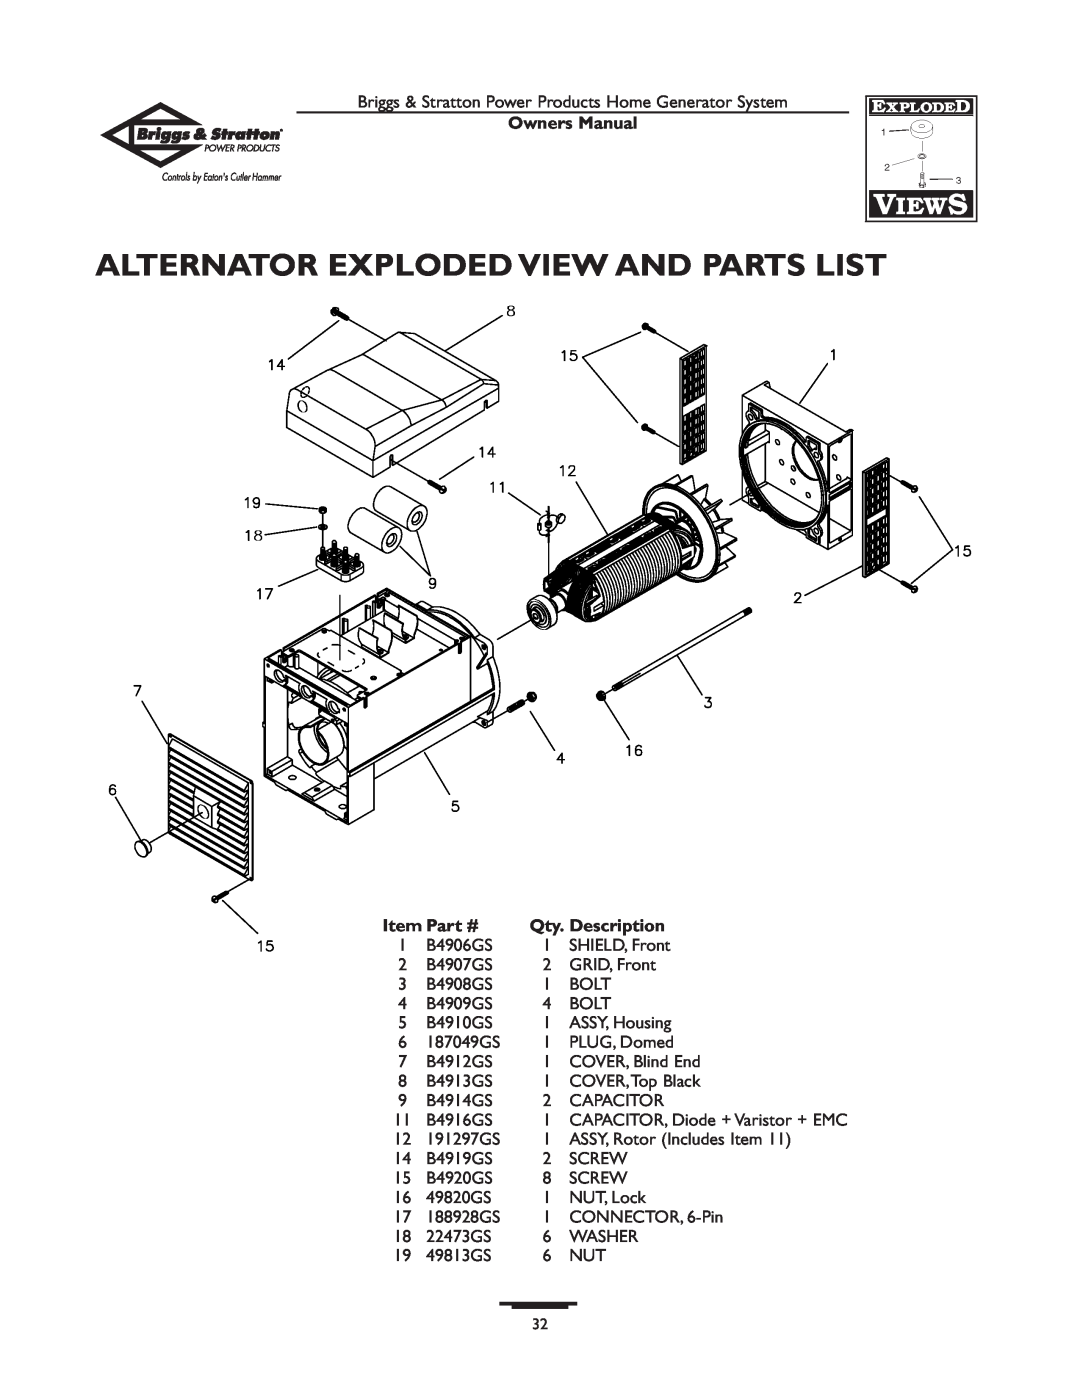 Briggs & Stratton 1679-0 owner manual Alternator Exploded View And Parts List, Owners Manual, Item Part #, Qty. Description 